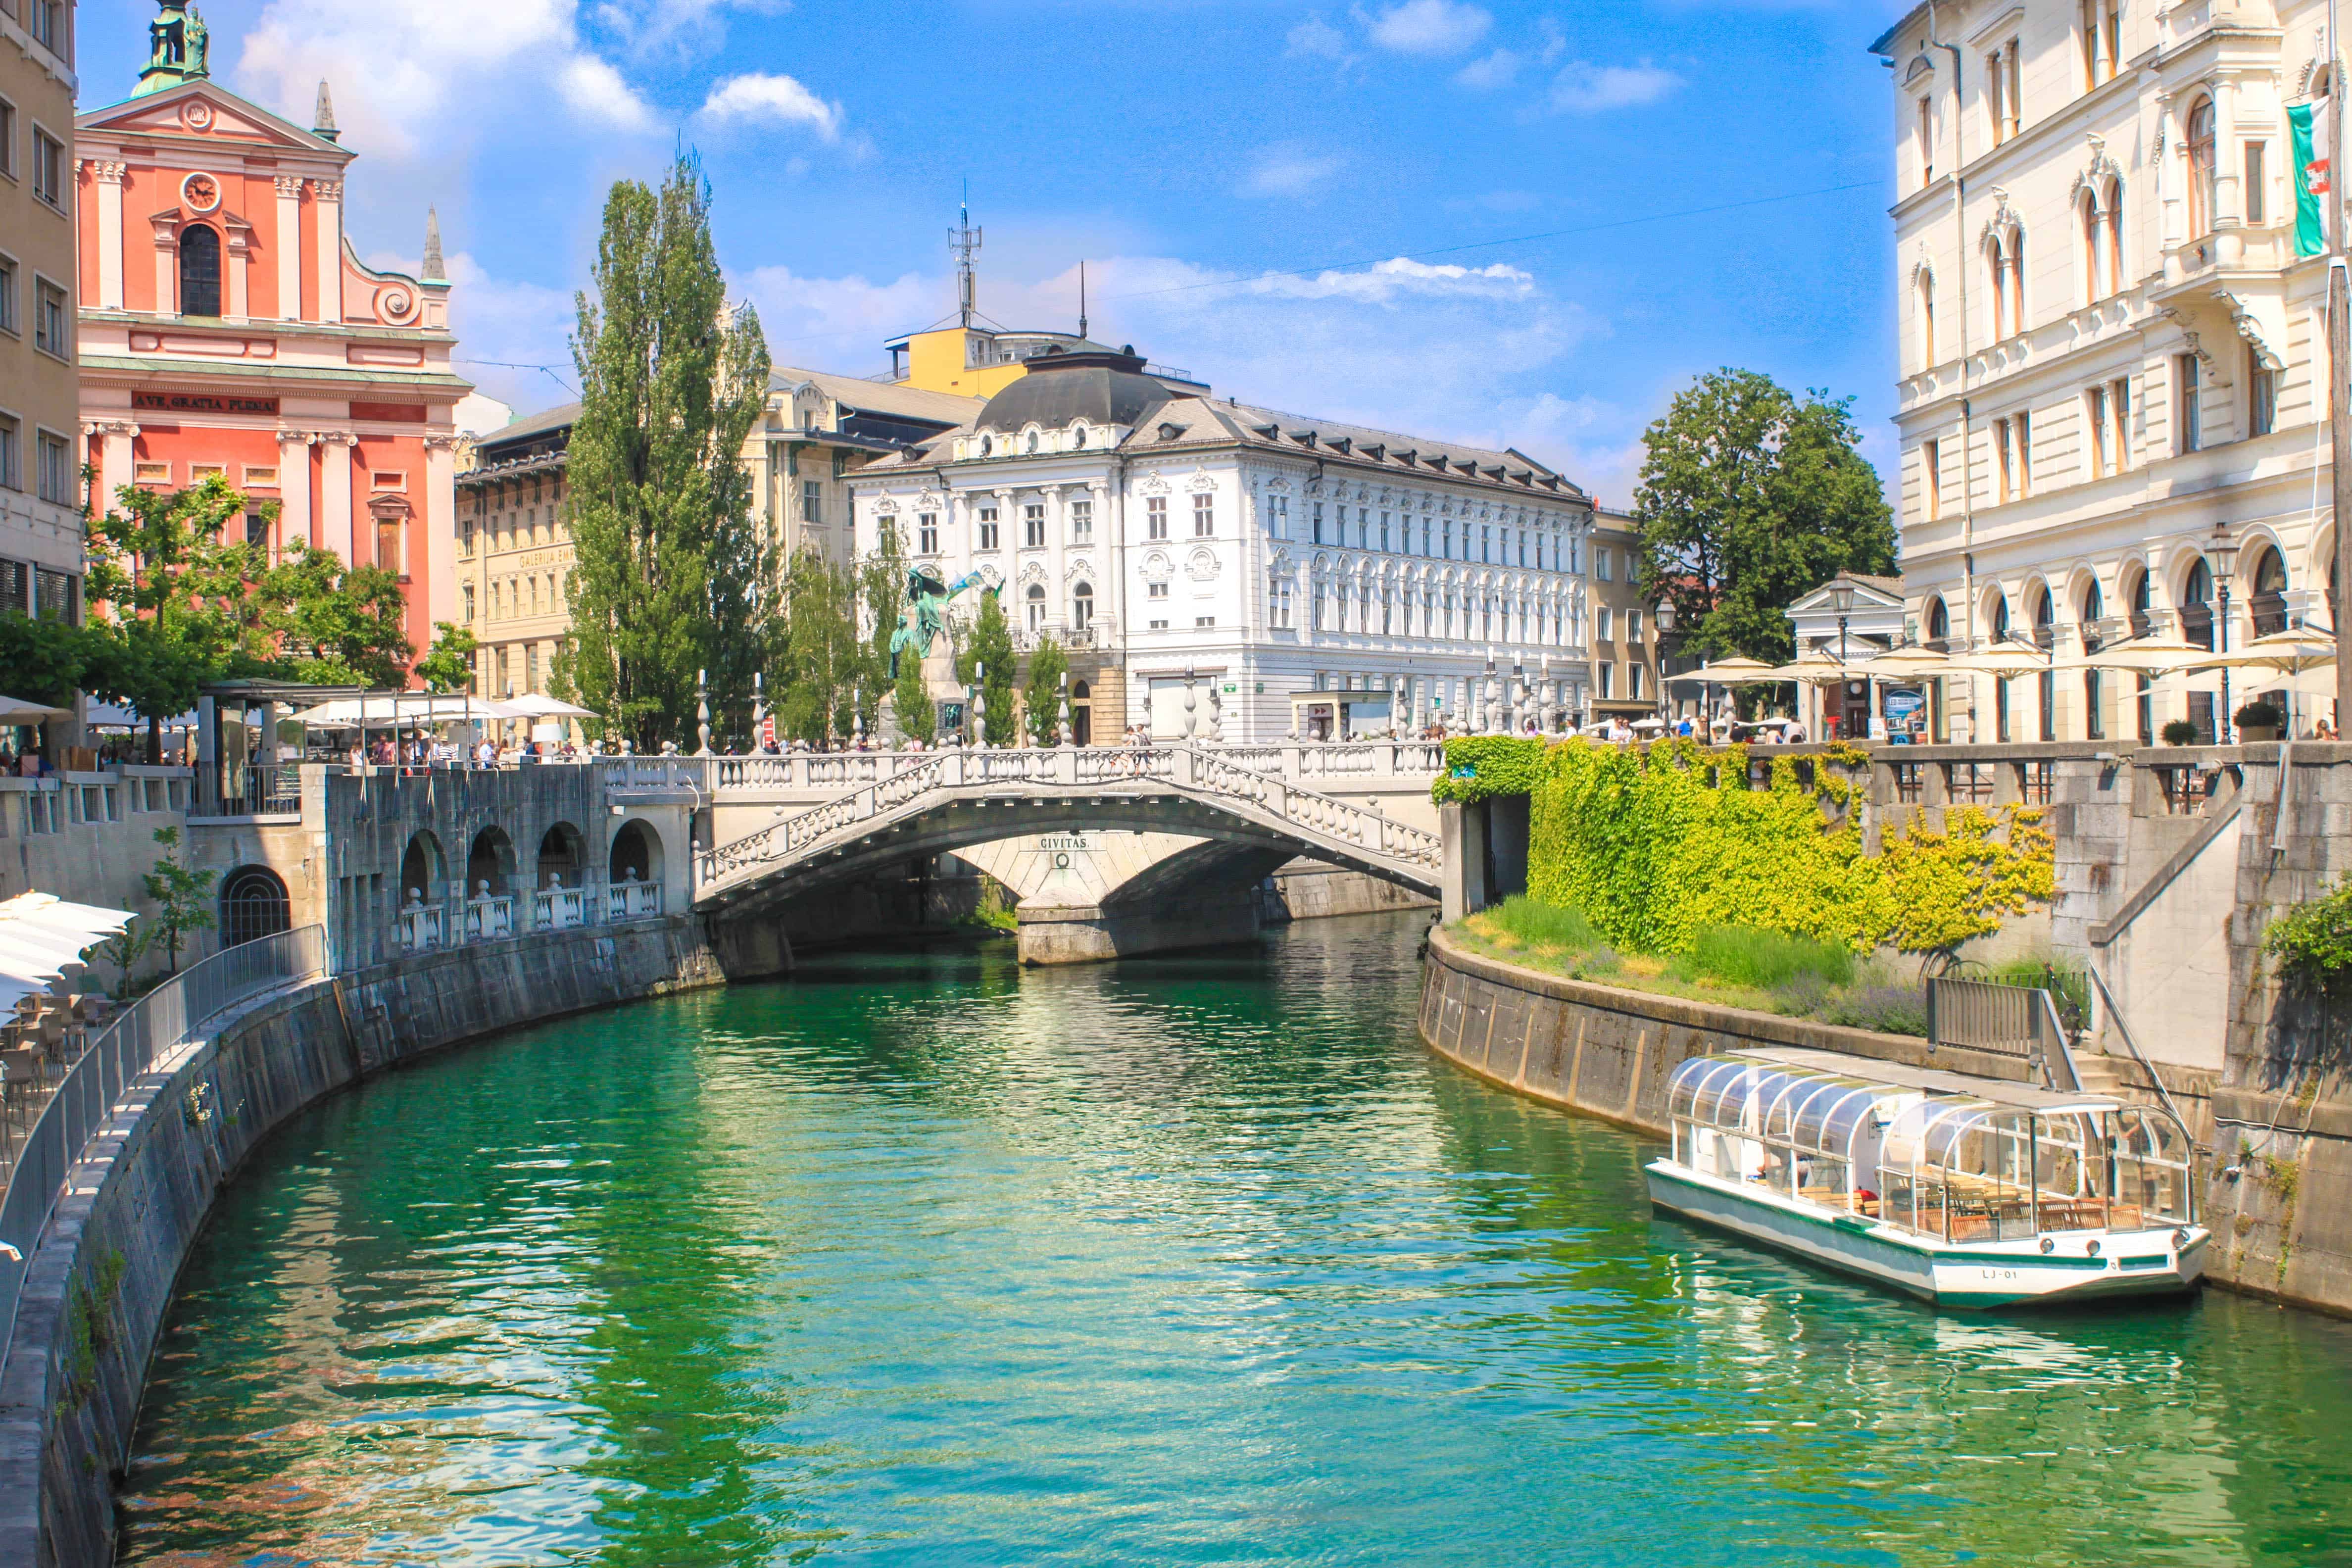 must places to visit in slovenia